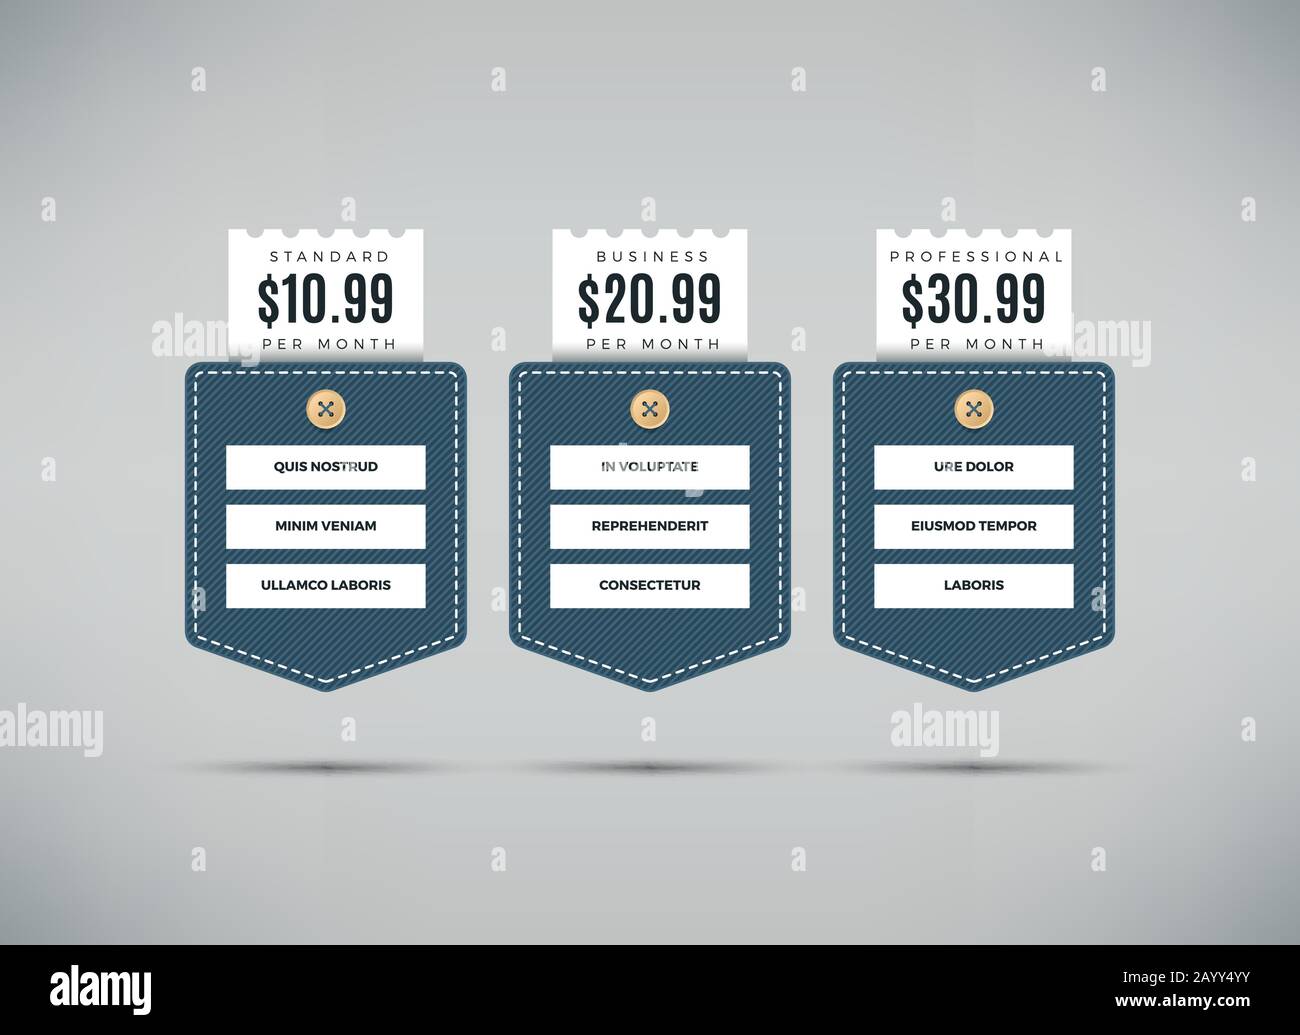 Web pricing table vector template for business plan with comparison of services Stock Vector